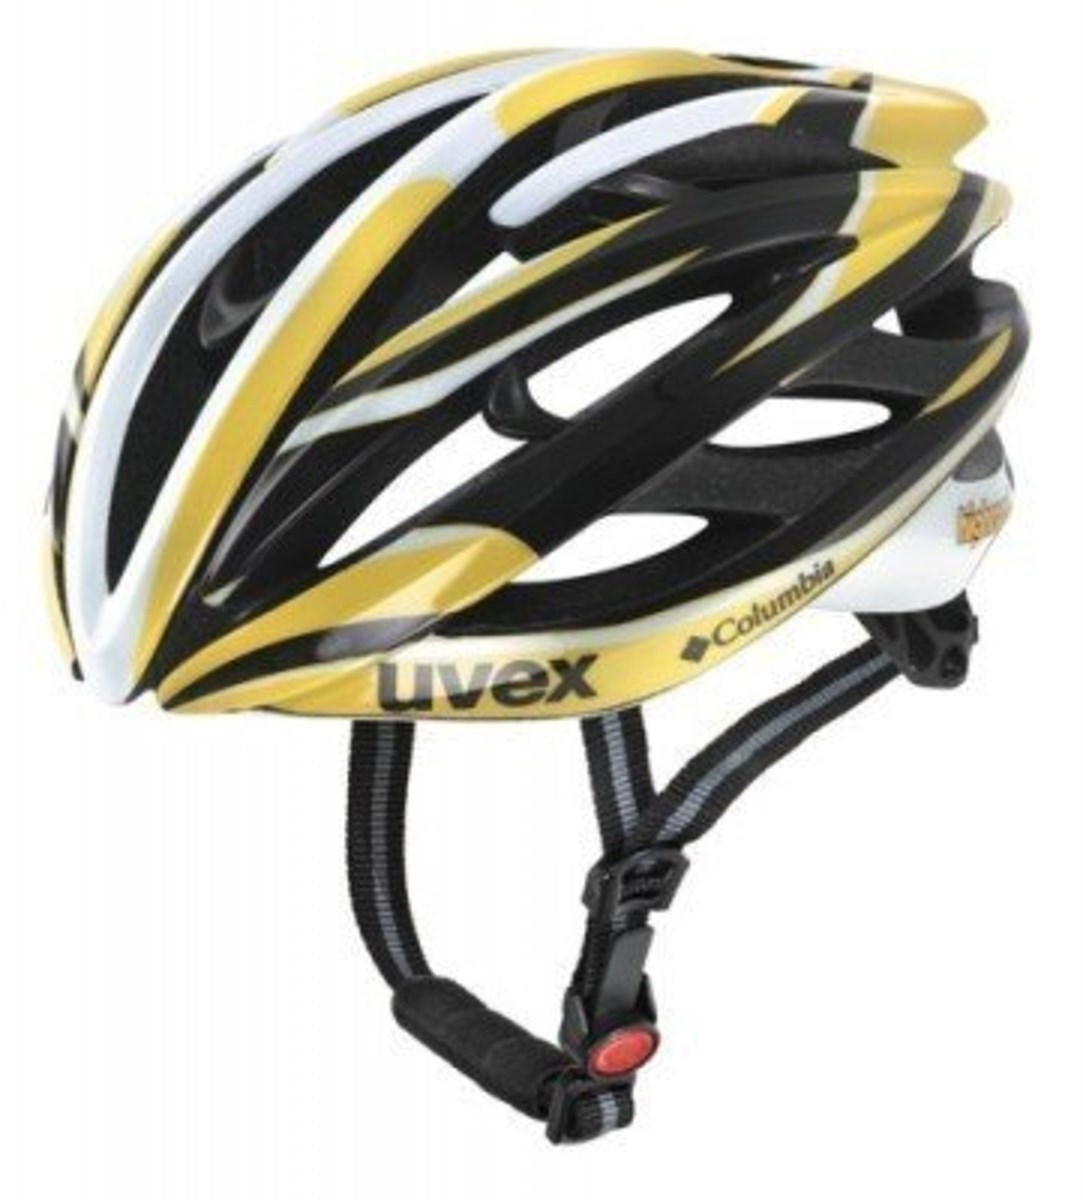 Uvex FP3.0 Road Cycling Helmet product image